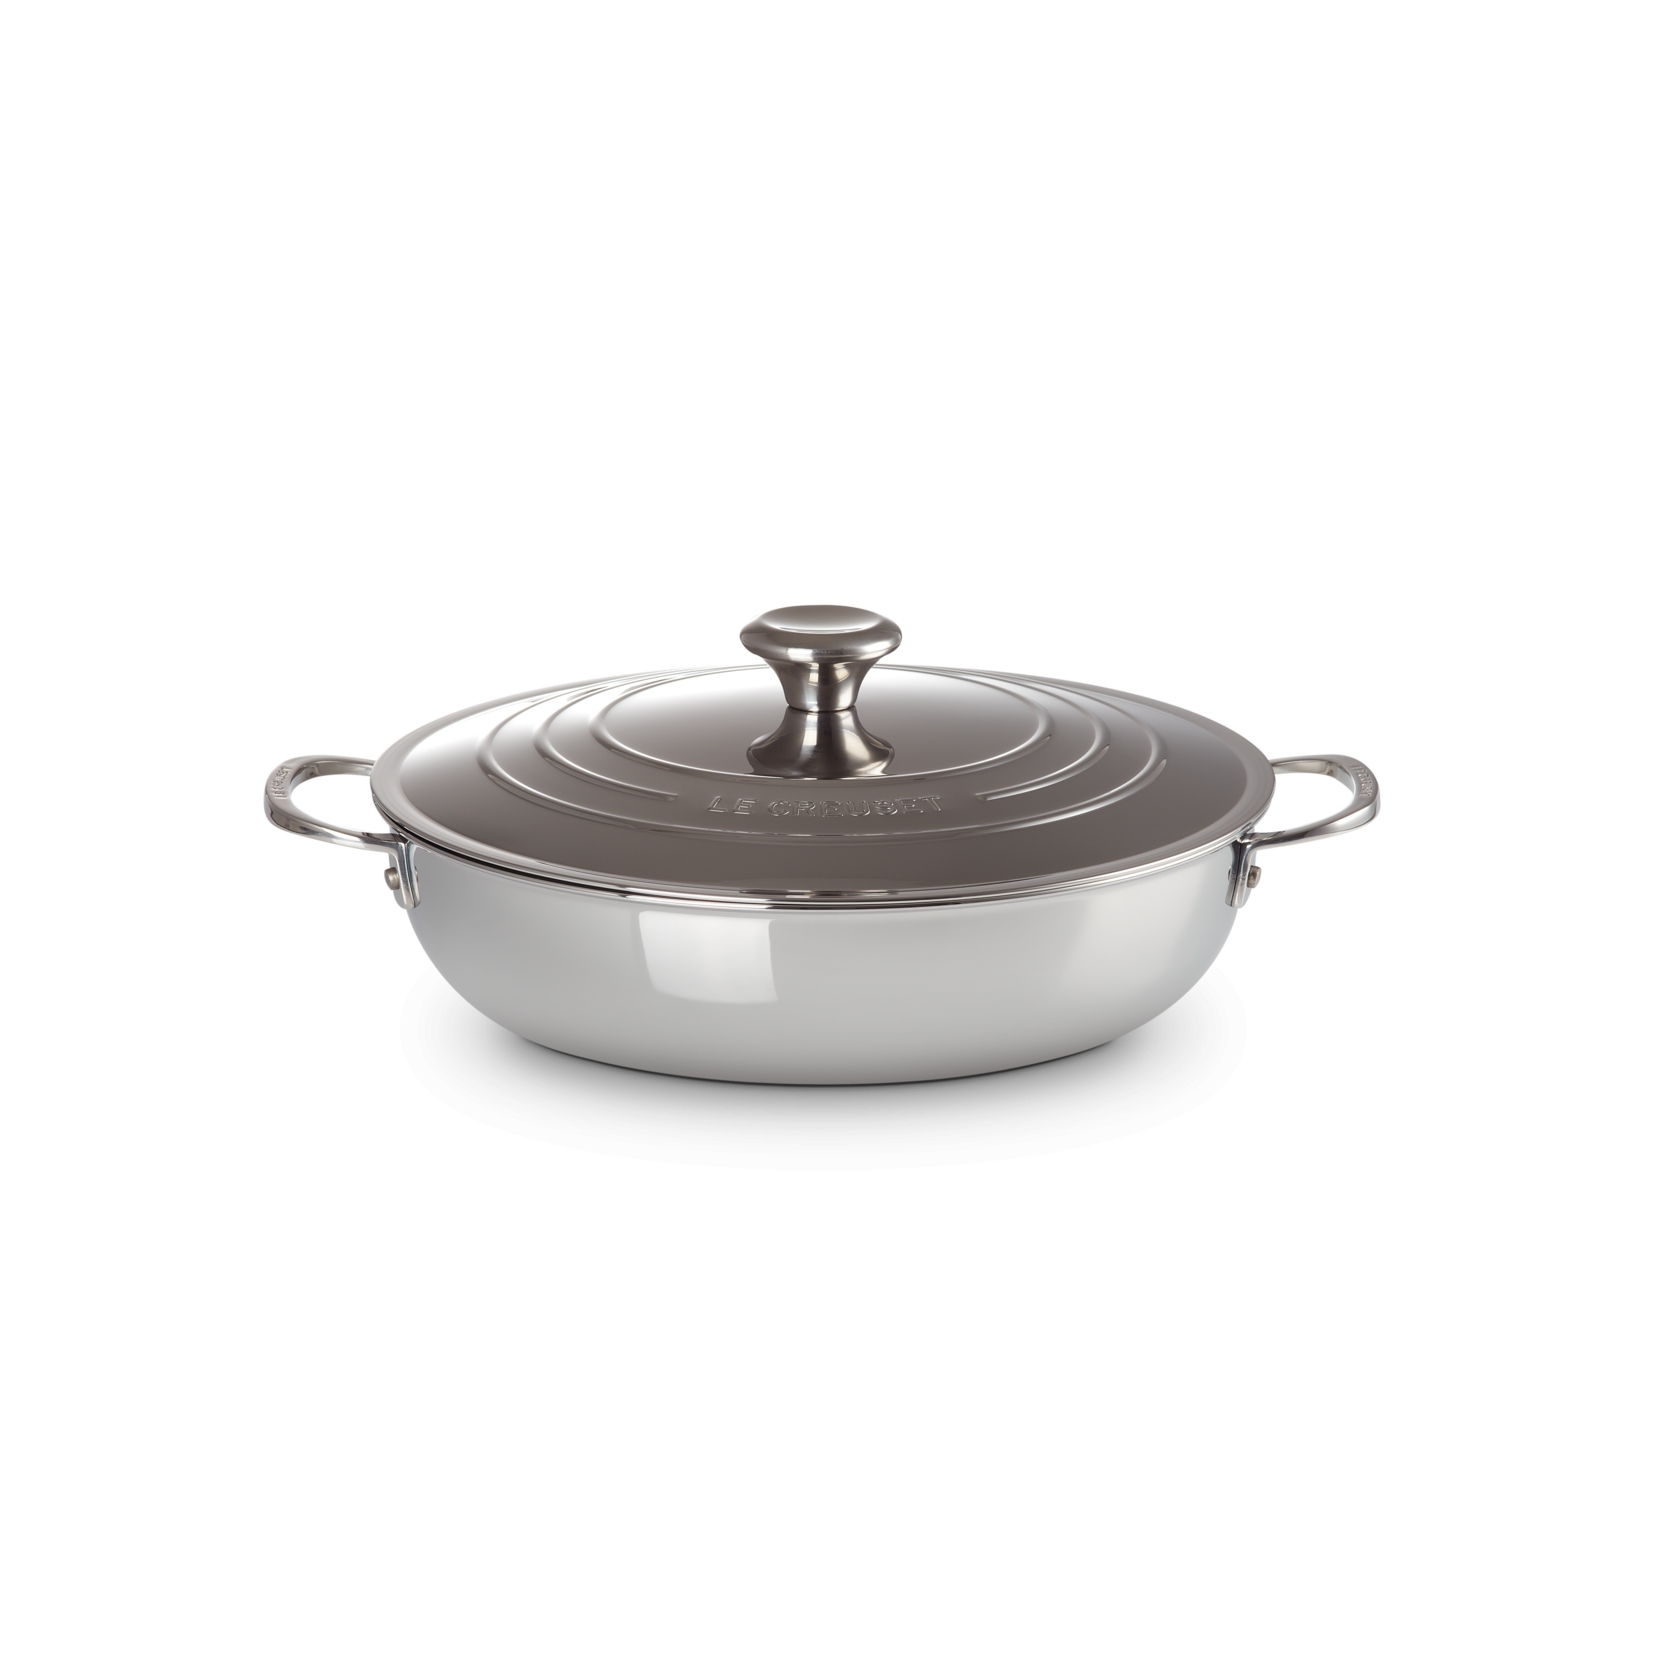 https://www.tattahome.com/53088-thickbox_default/le-creuset-signature-stainless-steel-shallow-casserole-with-lid.jpg